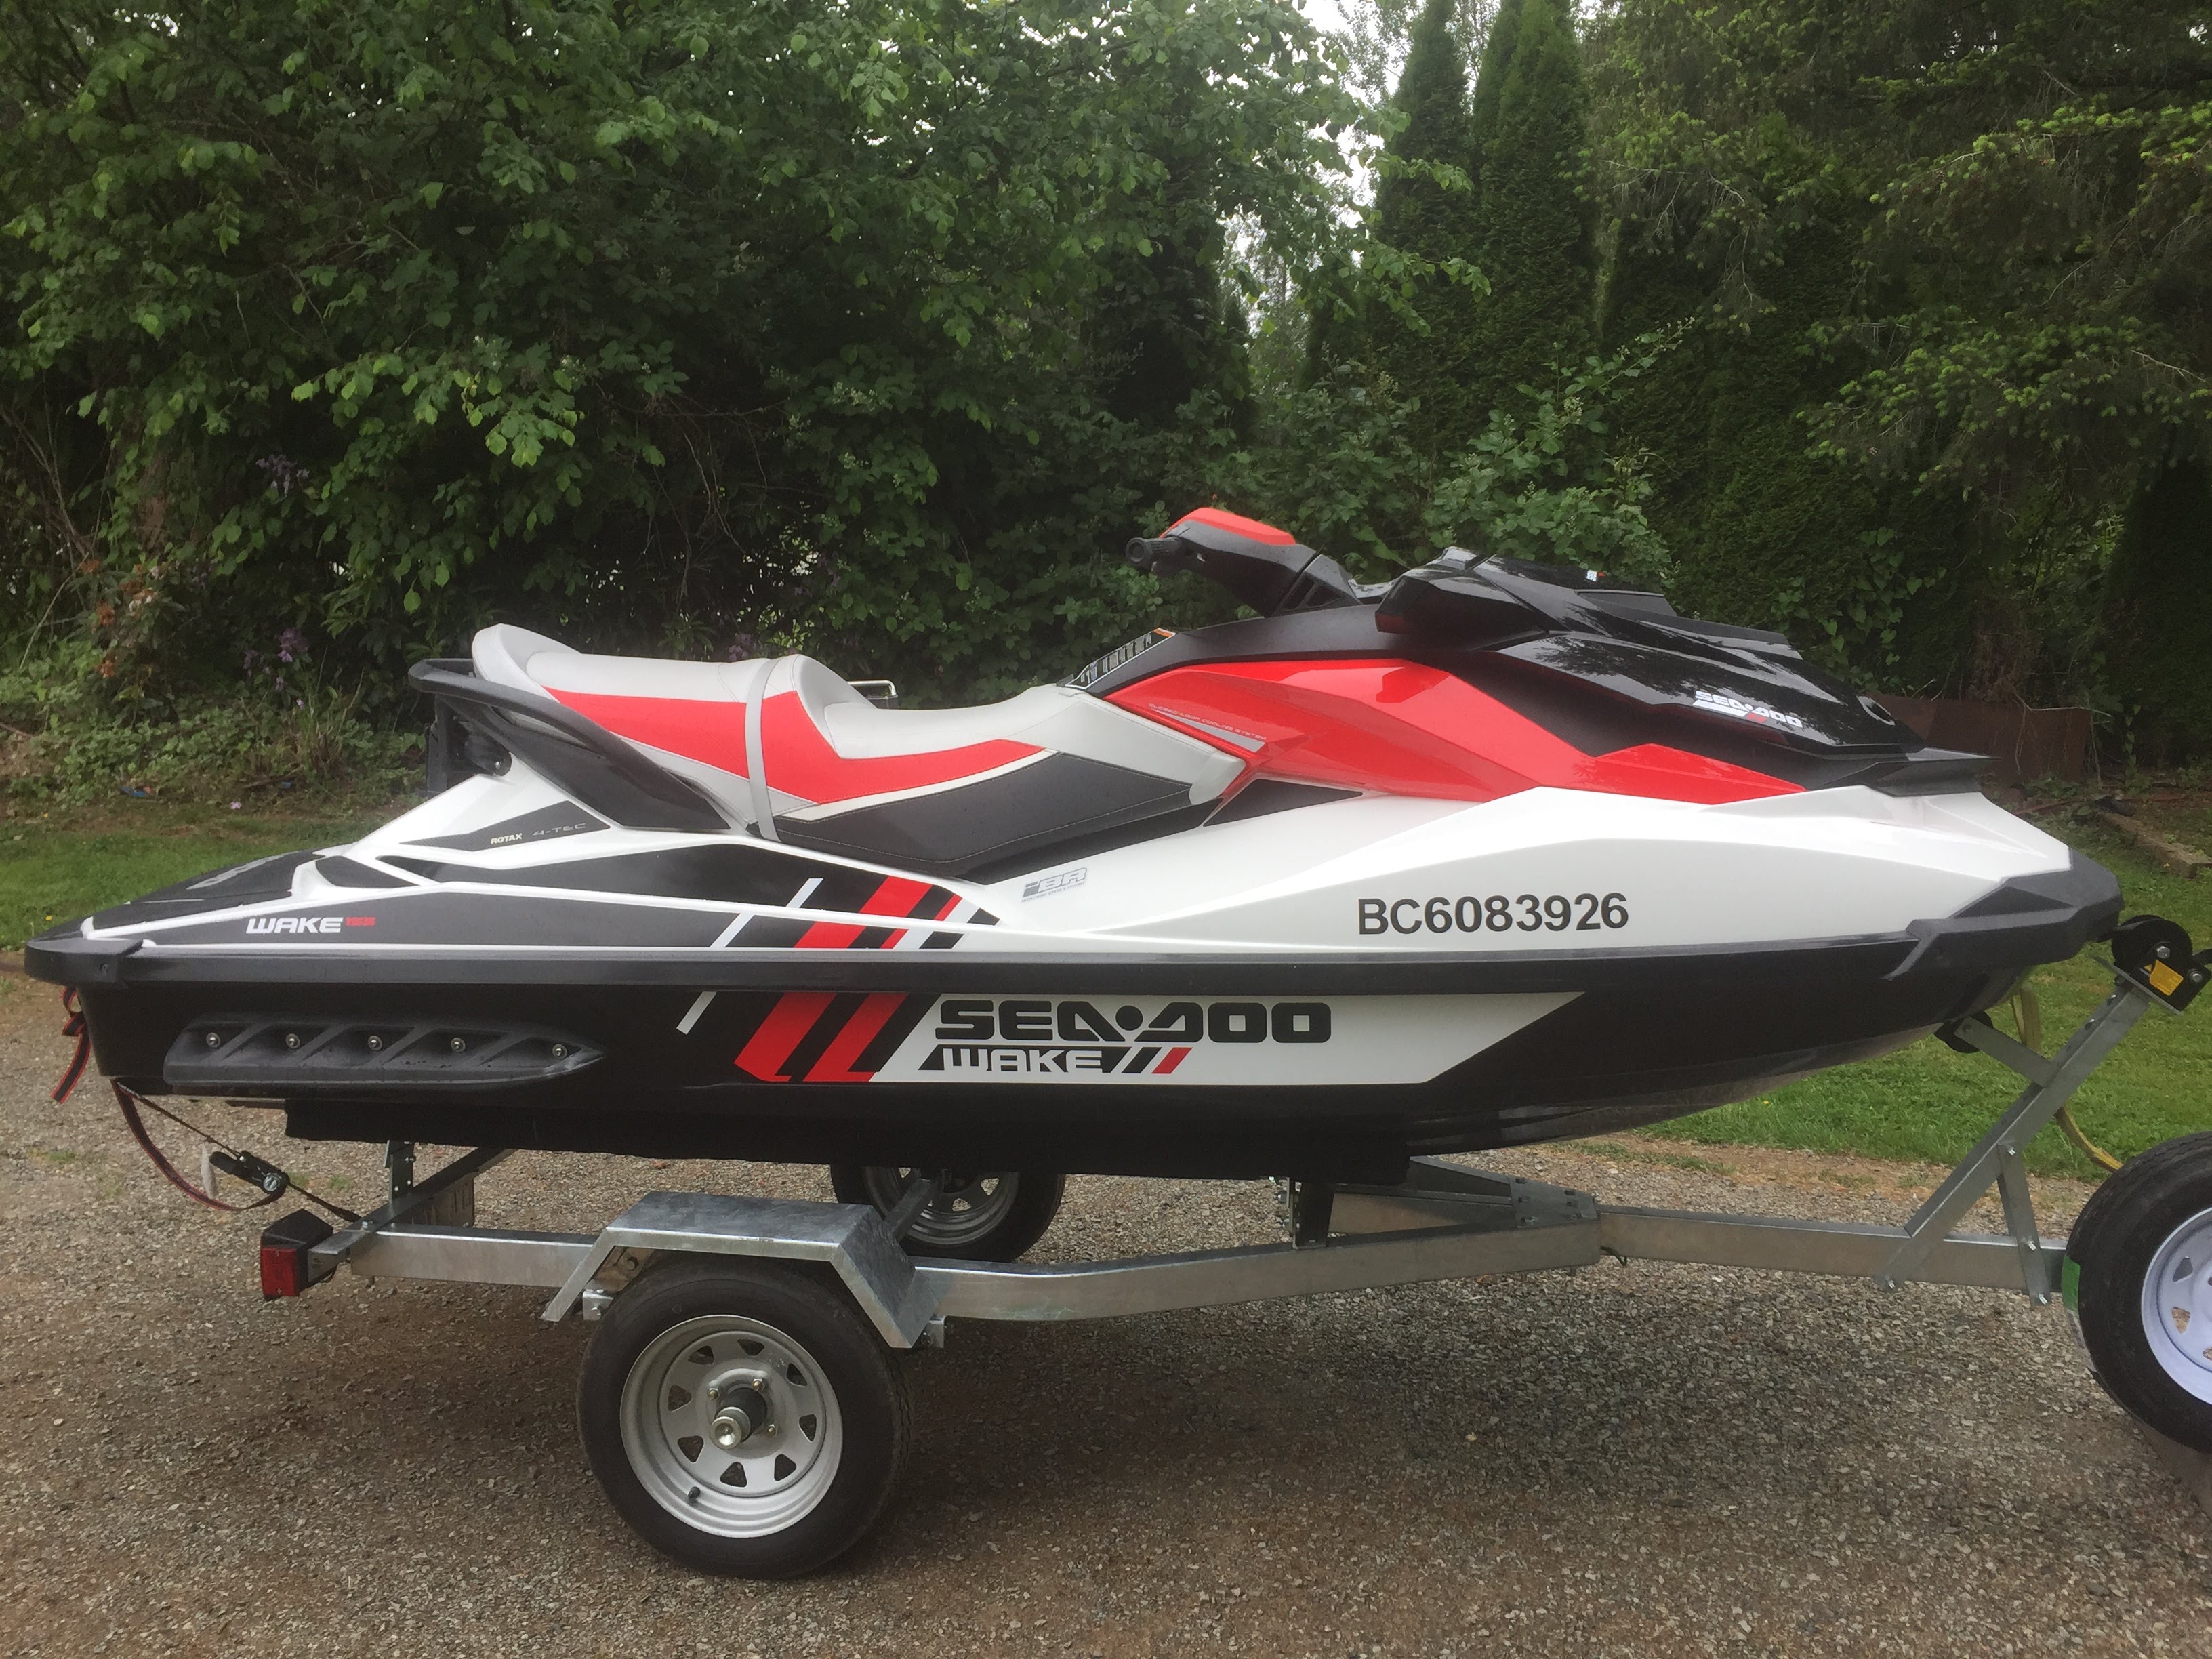 Sea Doo maintenance and repair from MRV Marine Services.